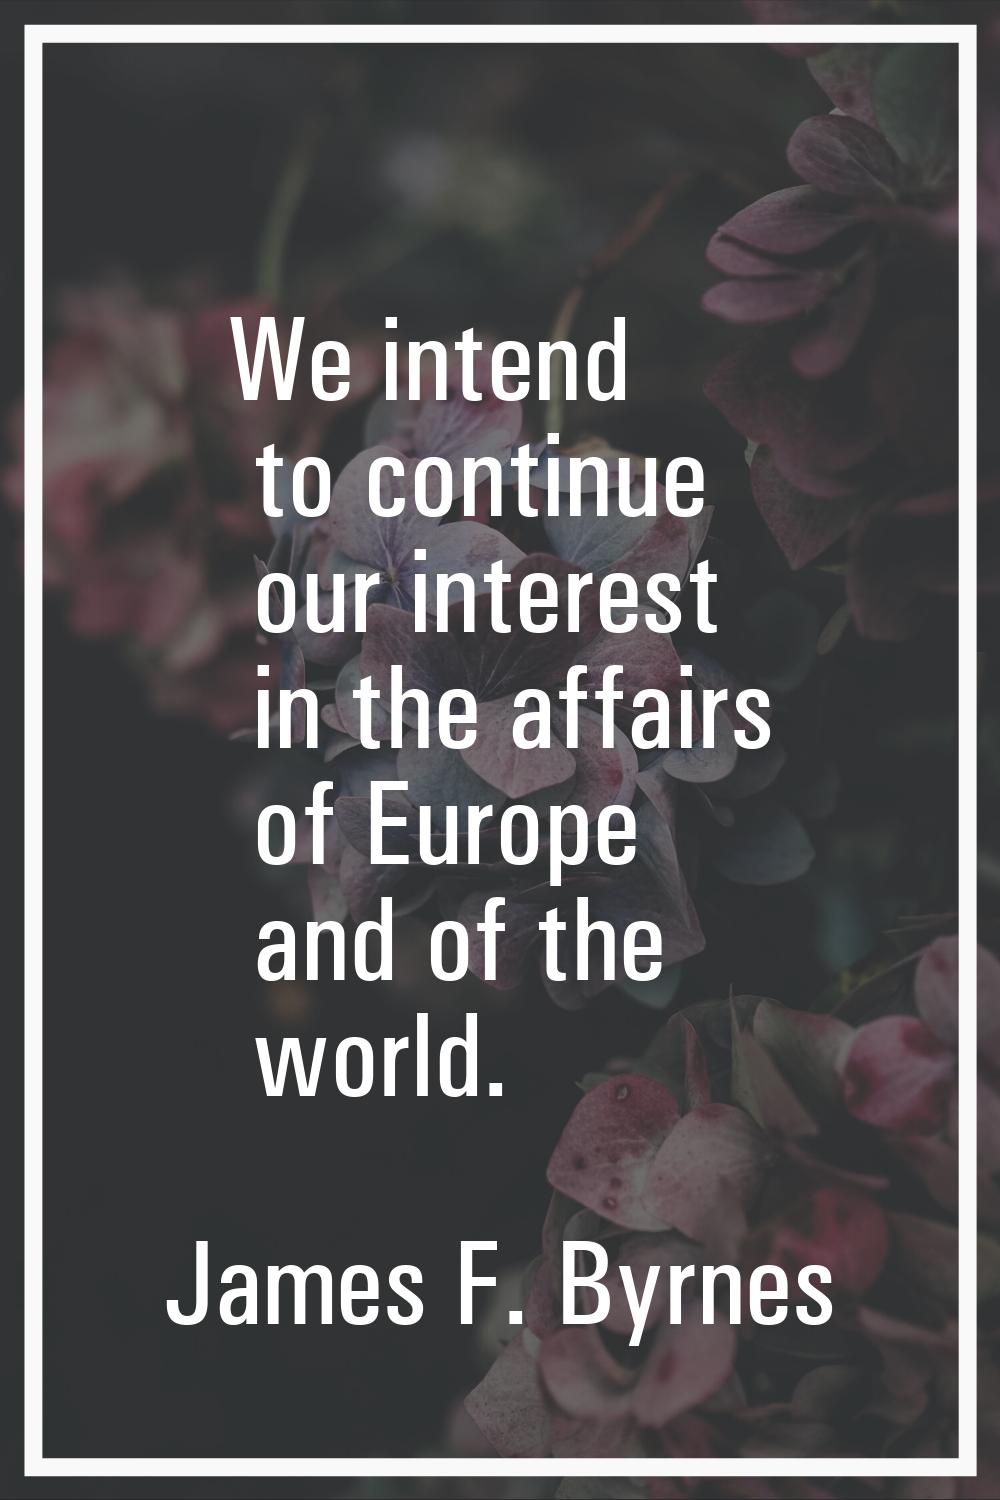 We intend to continue our interest in the affairs of Europe and of the world.